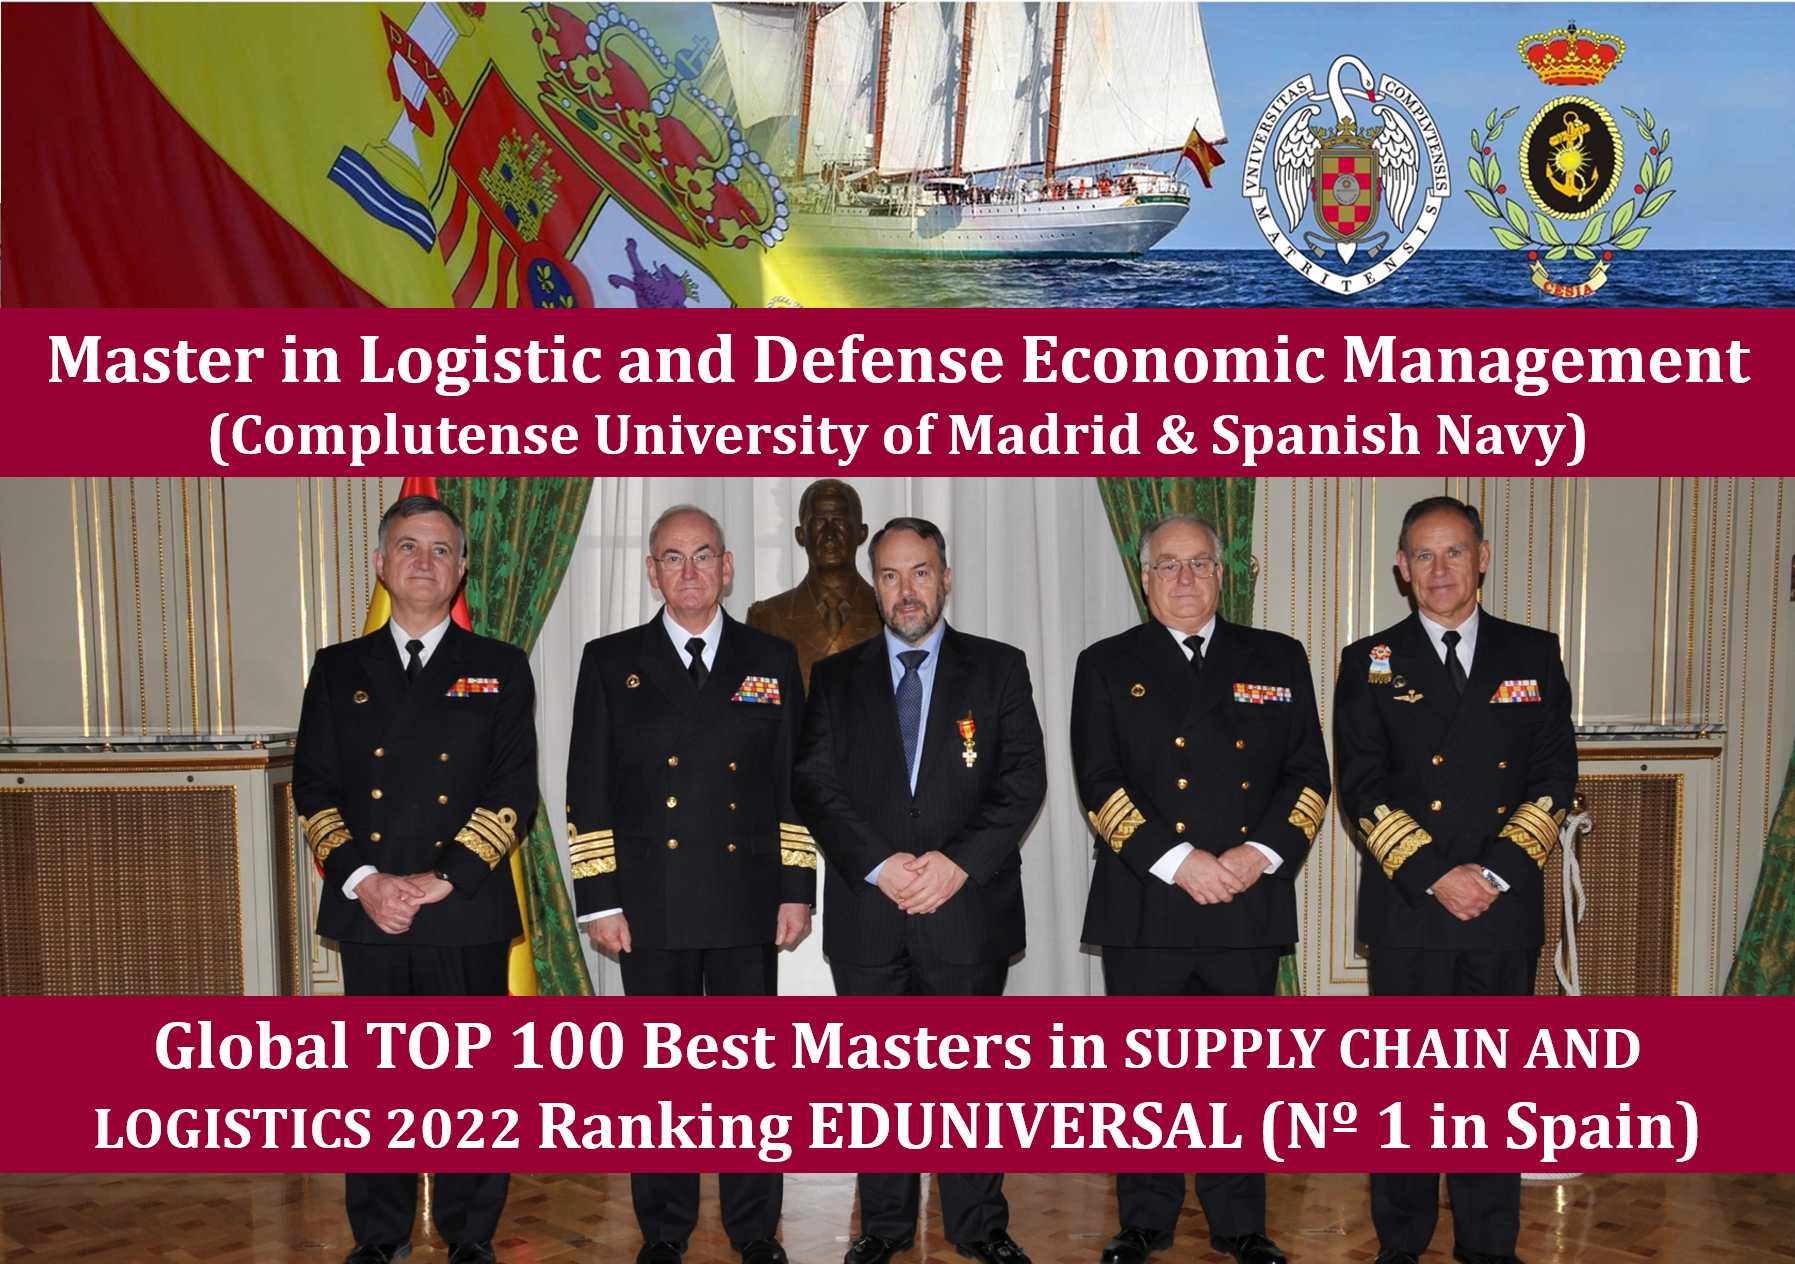 Global TOP 100 Best Masters in SUPPLY CHAIN AND LOGISTICS 2022 Ranking EDUNIVERSAL (Nº 1 in Spain)